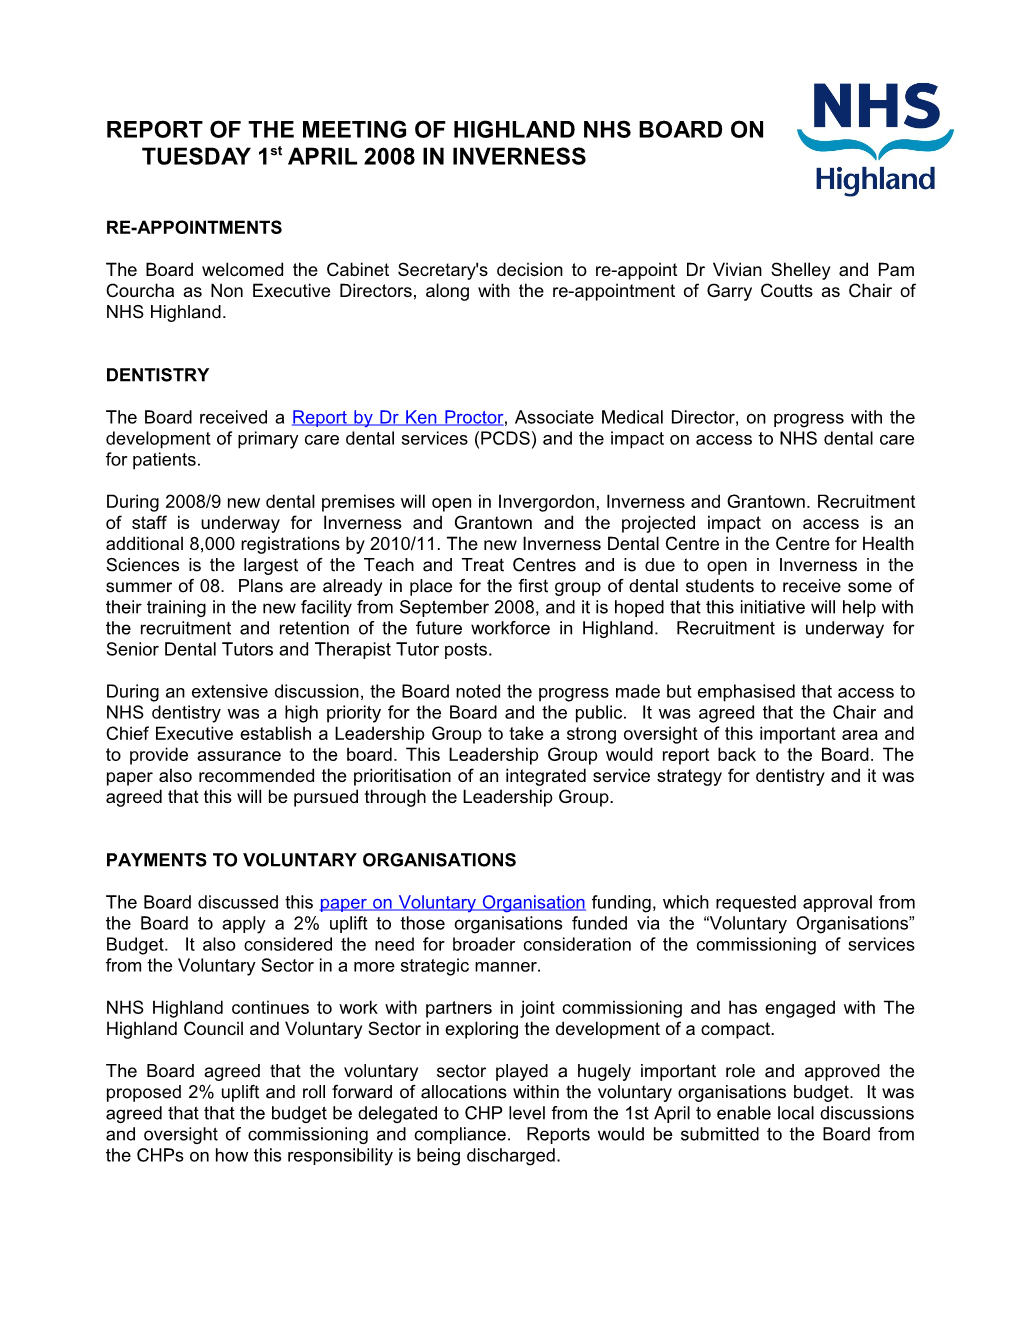 REPORT of the MEETING of HIGHLAND NHS BOARD on TUESDAY 1St APRIL 2008 in INVERNESS